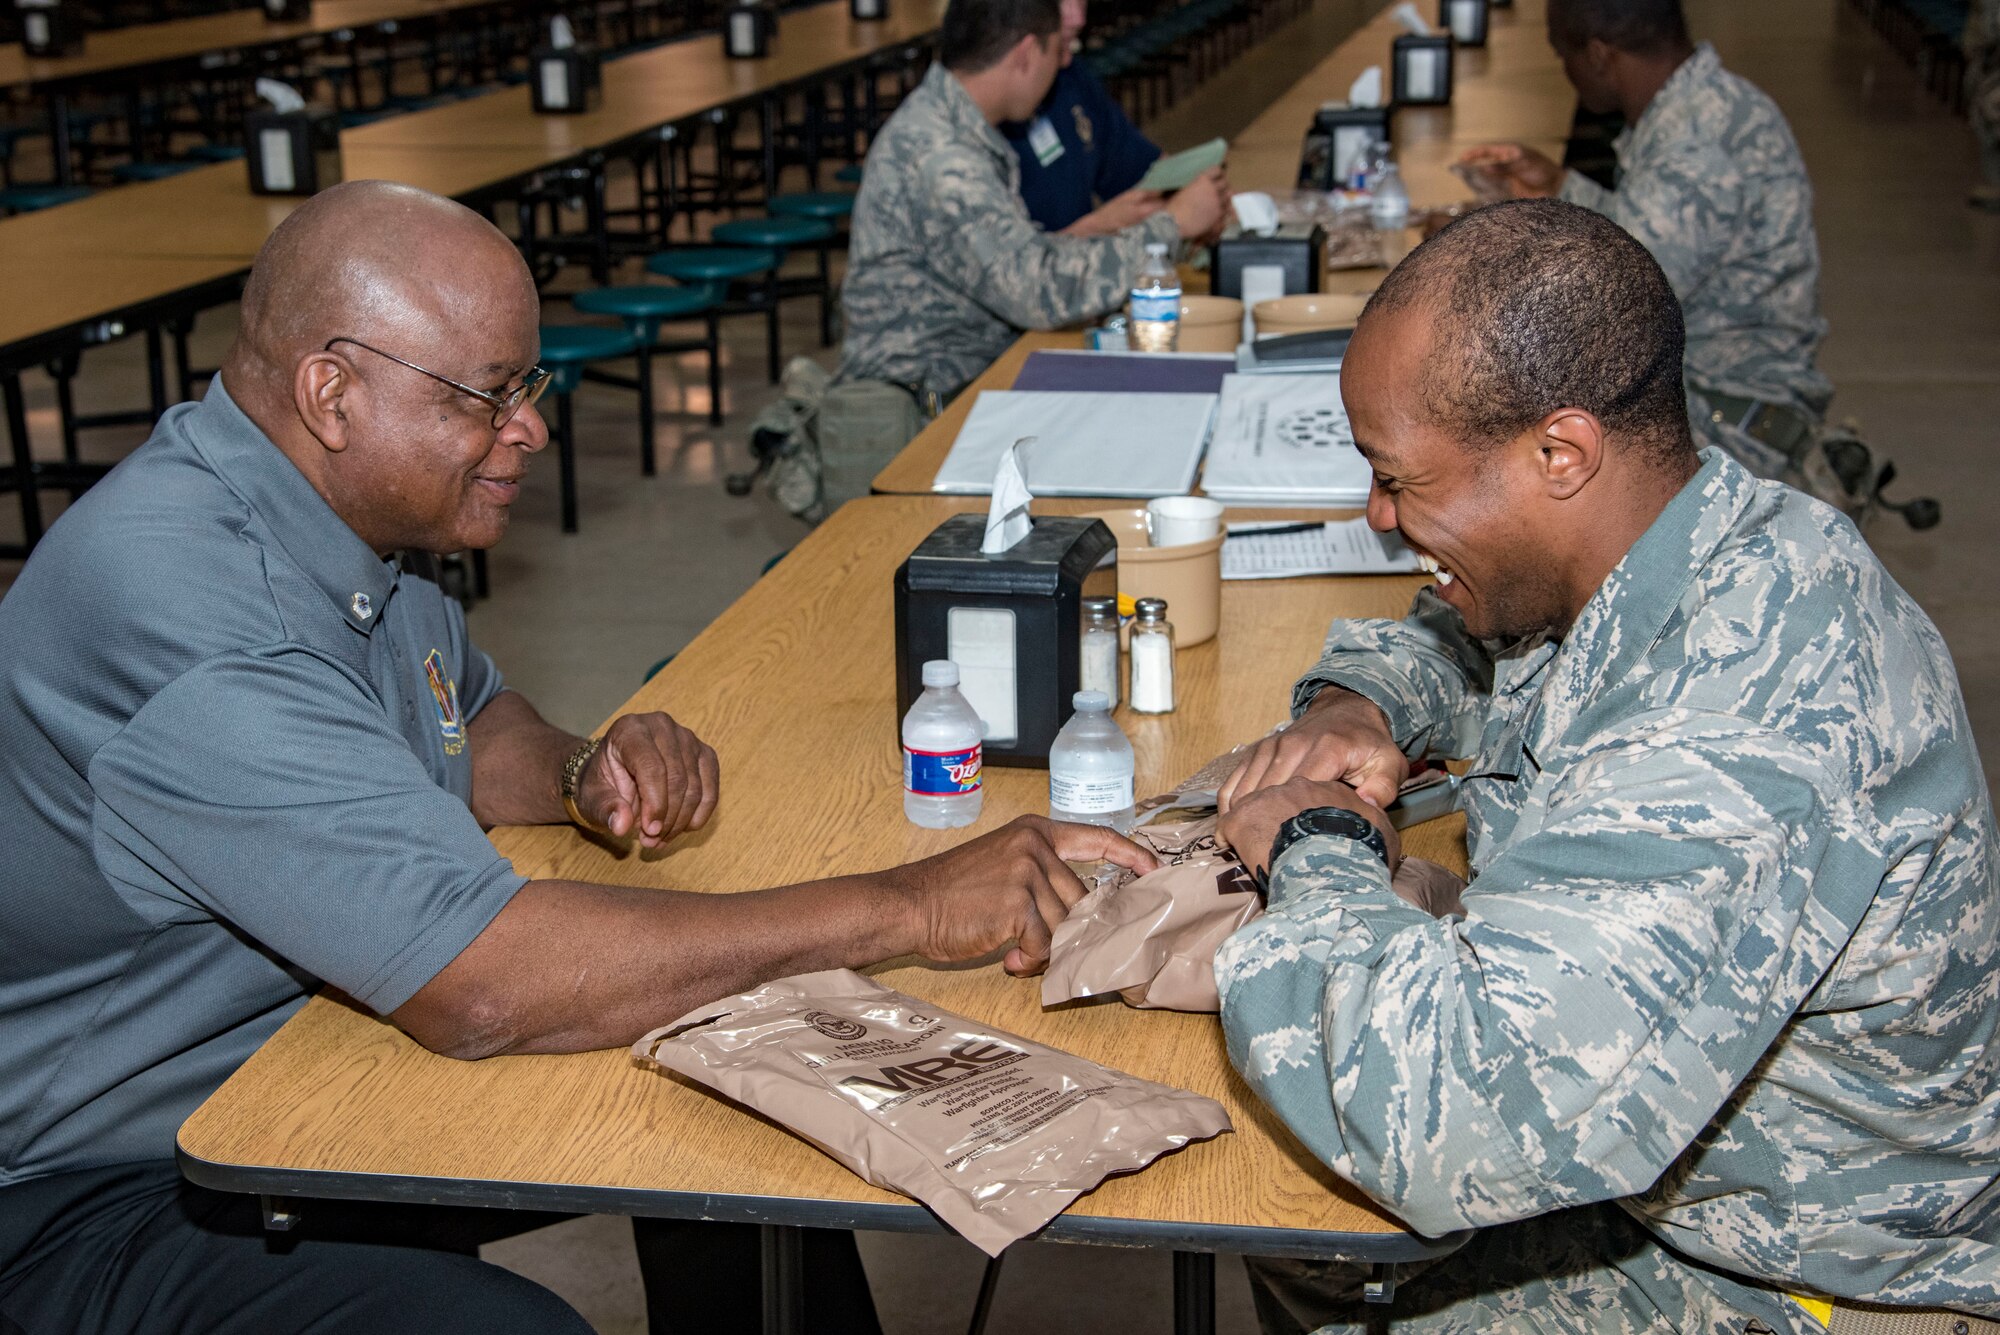 Air Mobility Command civic leader, Thomas Randall, visits with a trainee during a stop for an MRE lunch at Joint Base San Antonio-Lackland, May 2, 2019.  The civic leaders toured the 37th Training Wing, also known as the “Gateway Wing,” as guests of AMC Cmmander Gen. Maryanne Miller. (U.S. Air Force photo by Traci Howells)